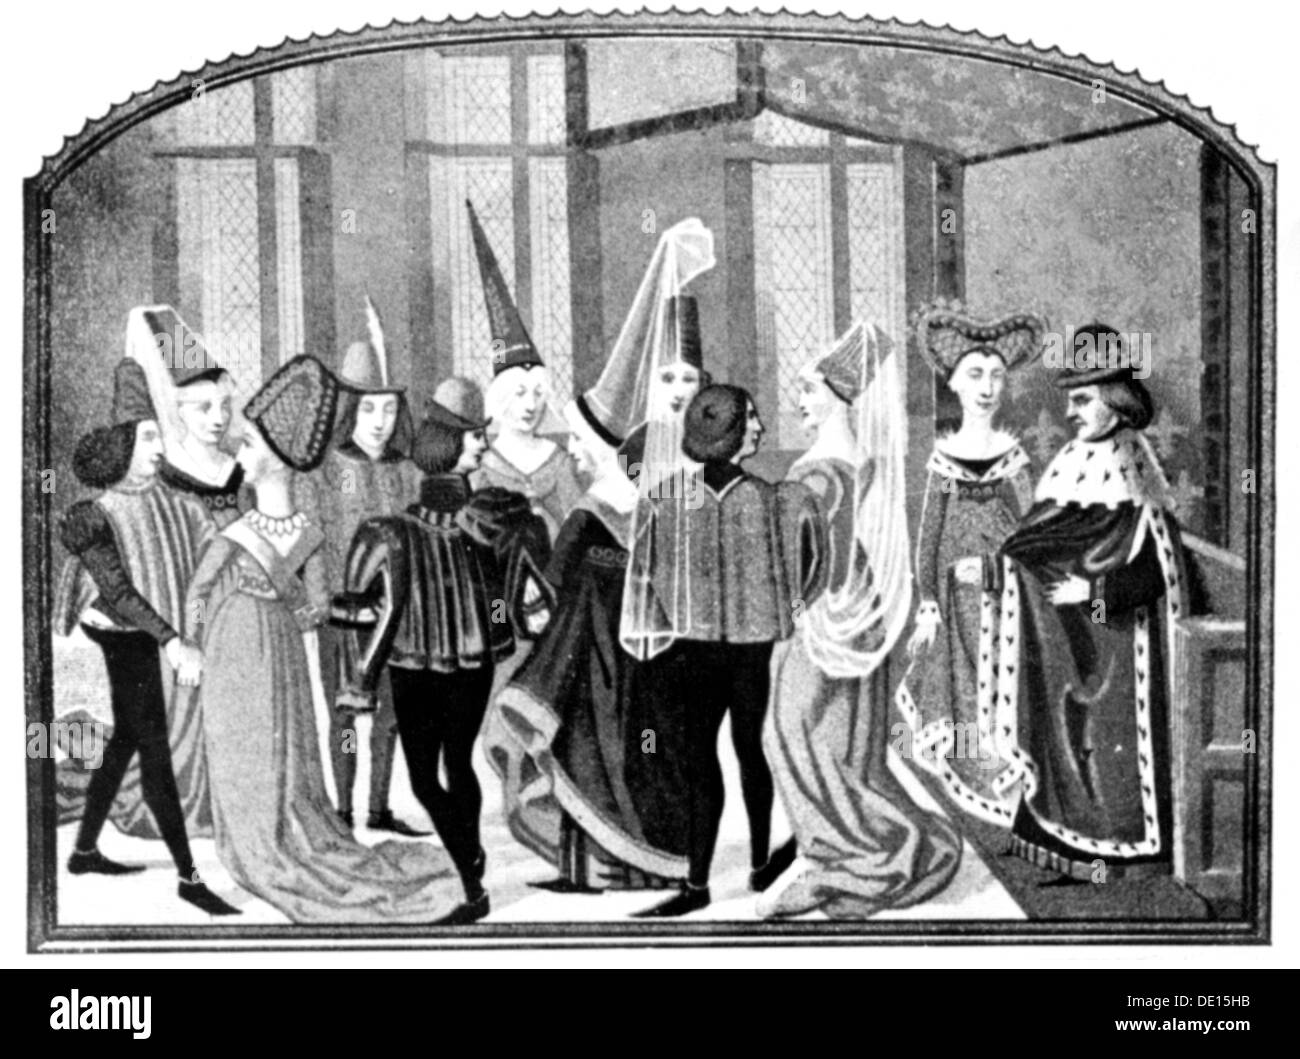 dance, Middle Ages, Gothic dance, miniature, Middle Ages, medieval, mediaeval, Burgundy, Bourgogne, fine arts, art, illuminated manuscript, fashion, clothes, outfit, outfits, headpiece, headpieces, hat, hats, veil, veils, aristocracy, aristocracies, prince, princes, full length, dancing, dance, dances, miniature, miniatures, historic, historical, people, Additional-Rights-Clearences-Not Available Stock Photo